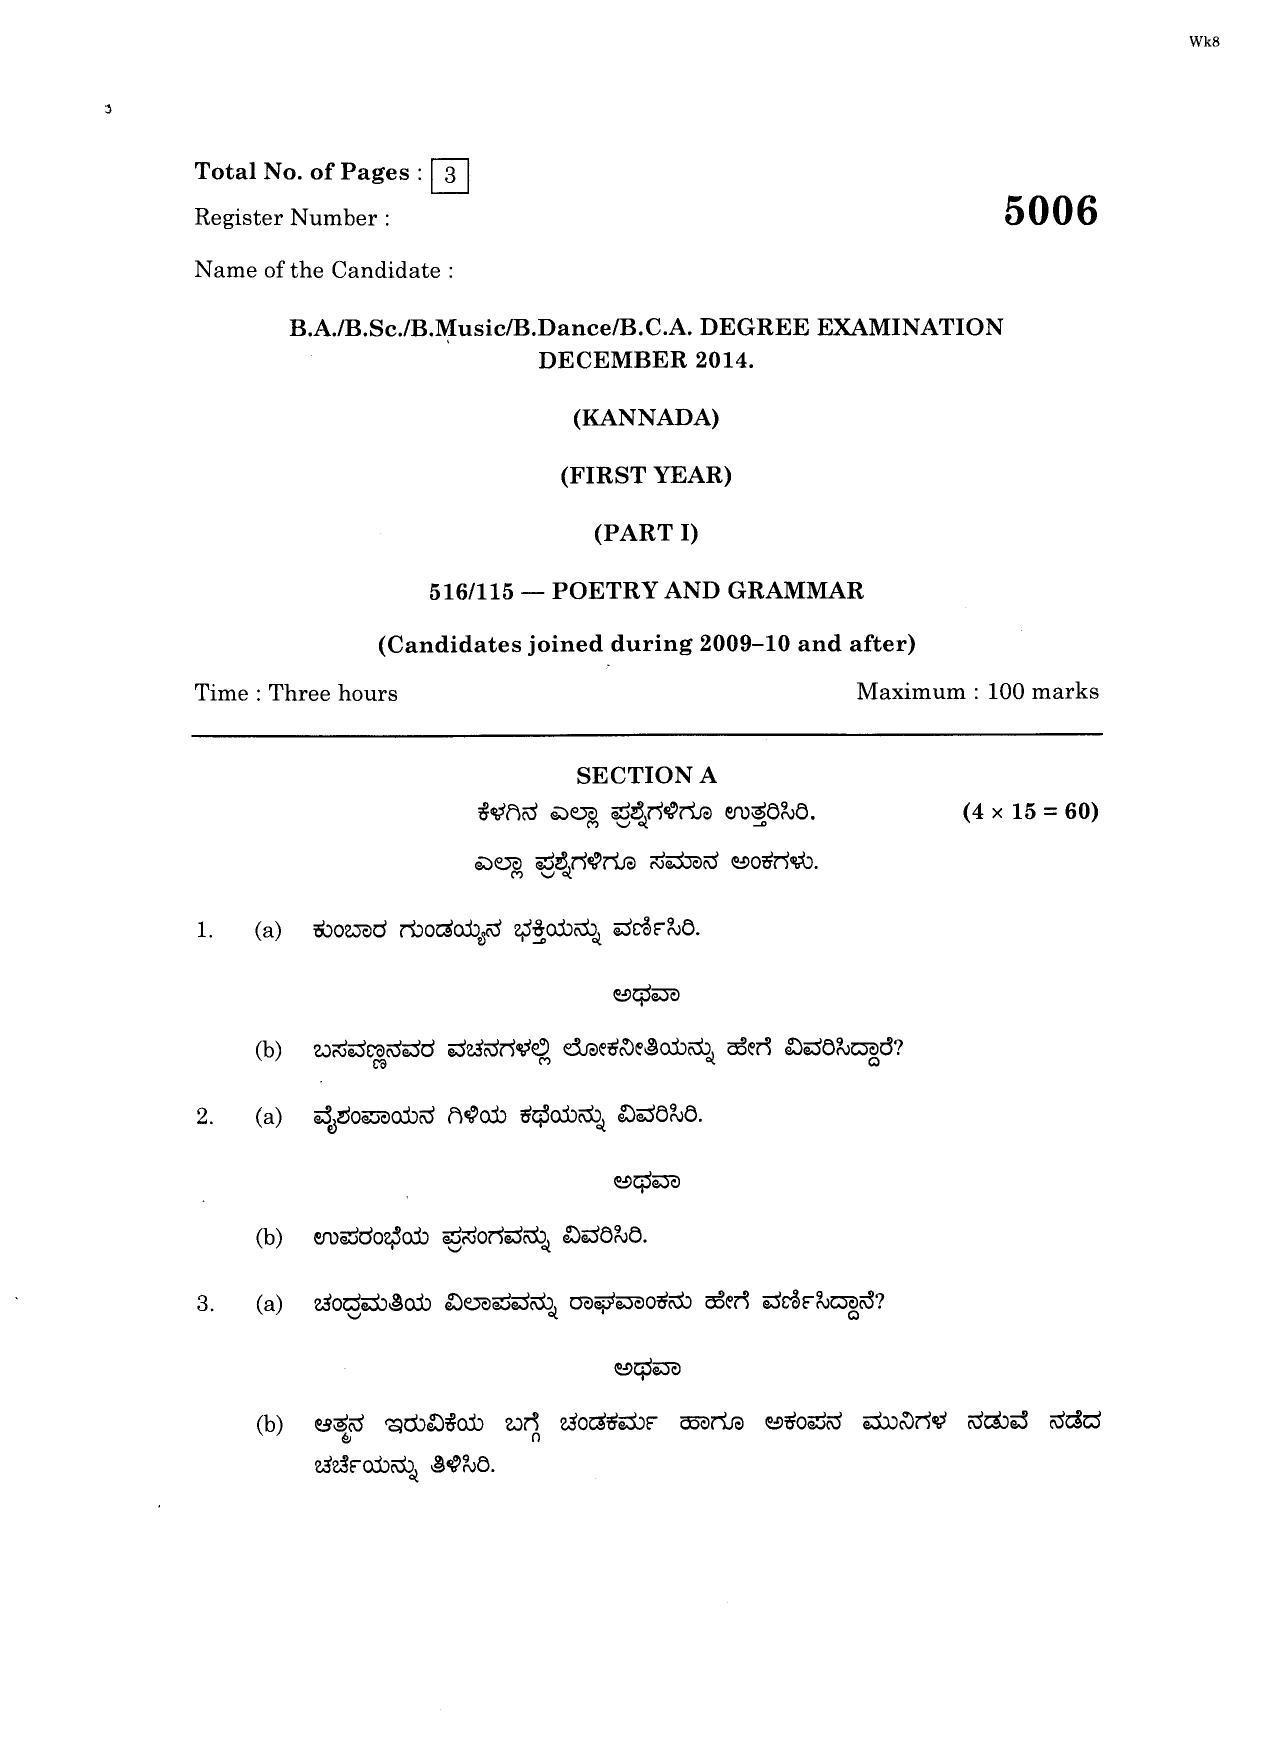 Annamalai University Kannada – Poetry And Grammar B.Sc Visual Communication December 2014 Question Papers - Page 1